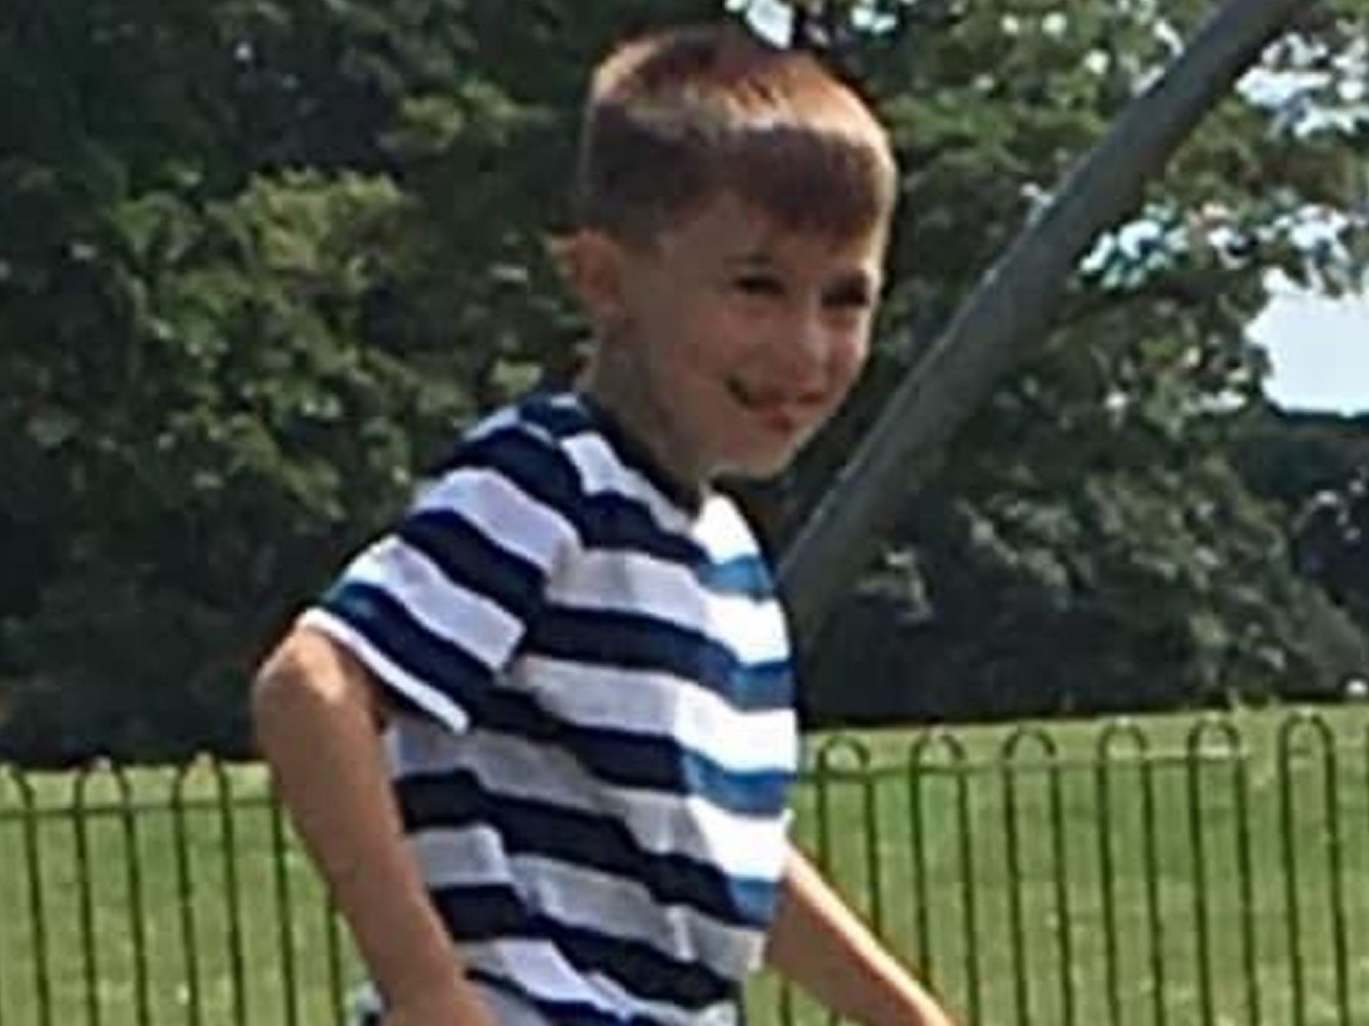 Six-year-old Lucas Dobson went missing after falling into the River Stour in Sandwich, Kent, during a fish trip with family on 17 August 2019.